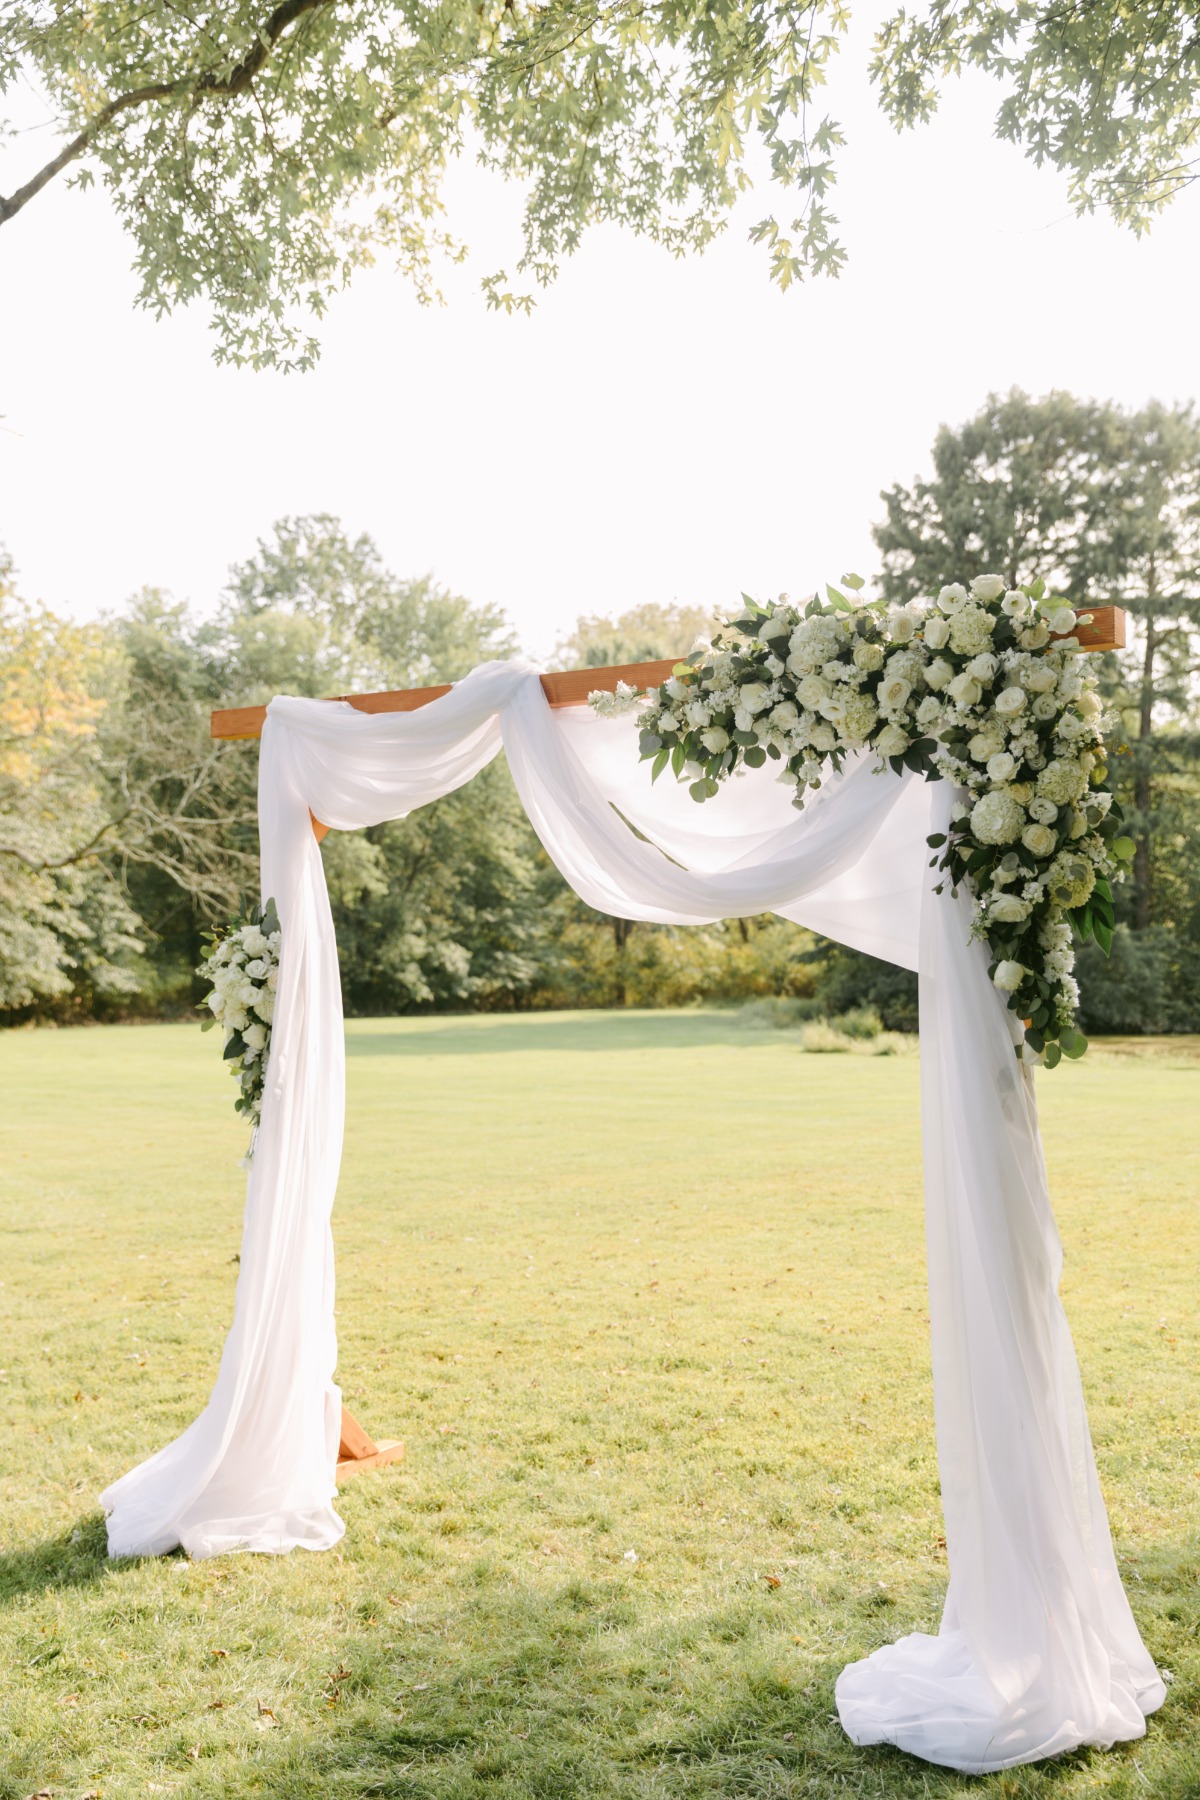 Ceremony altar with white drapery and white floral installation